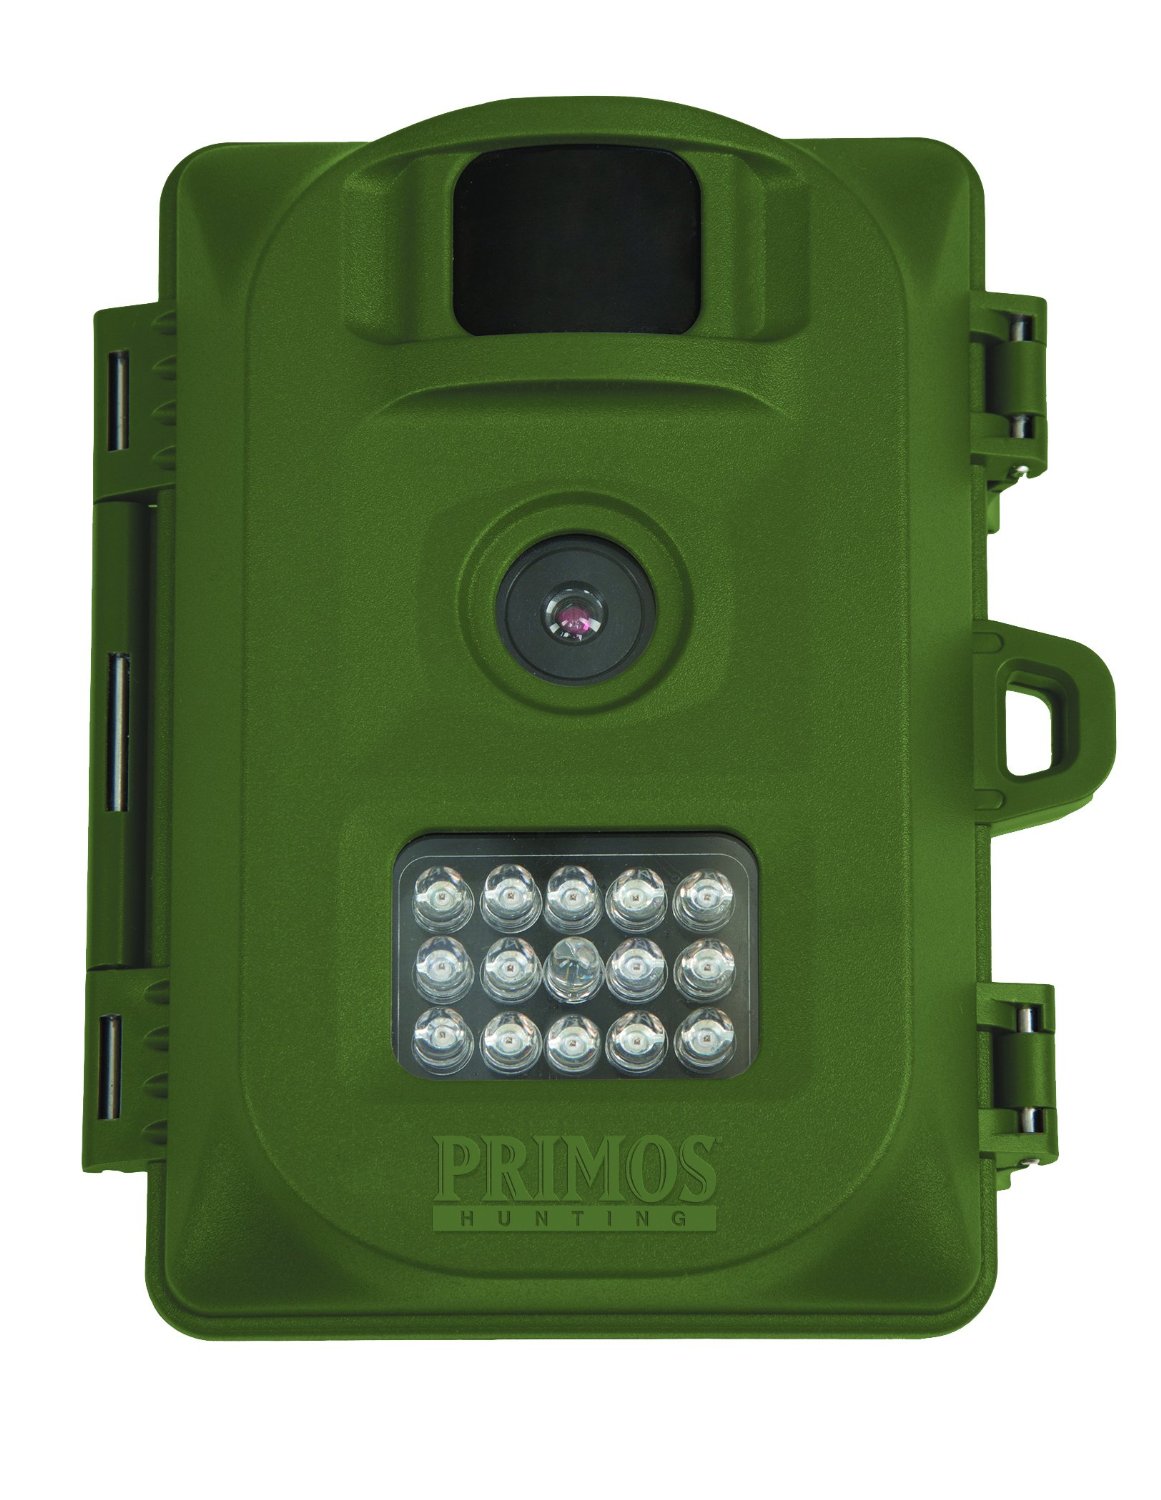 Primos 6MP Bullet Proof Trail Camera with Low Glow LED, Green - $28.99 shipped (LD) (Free S/H over $25)